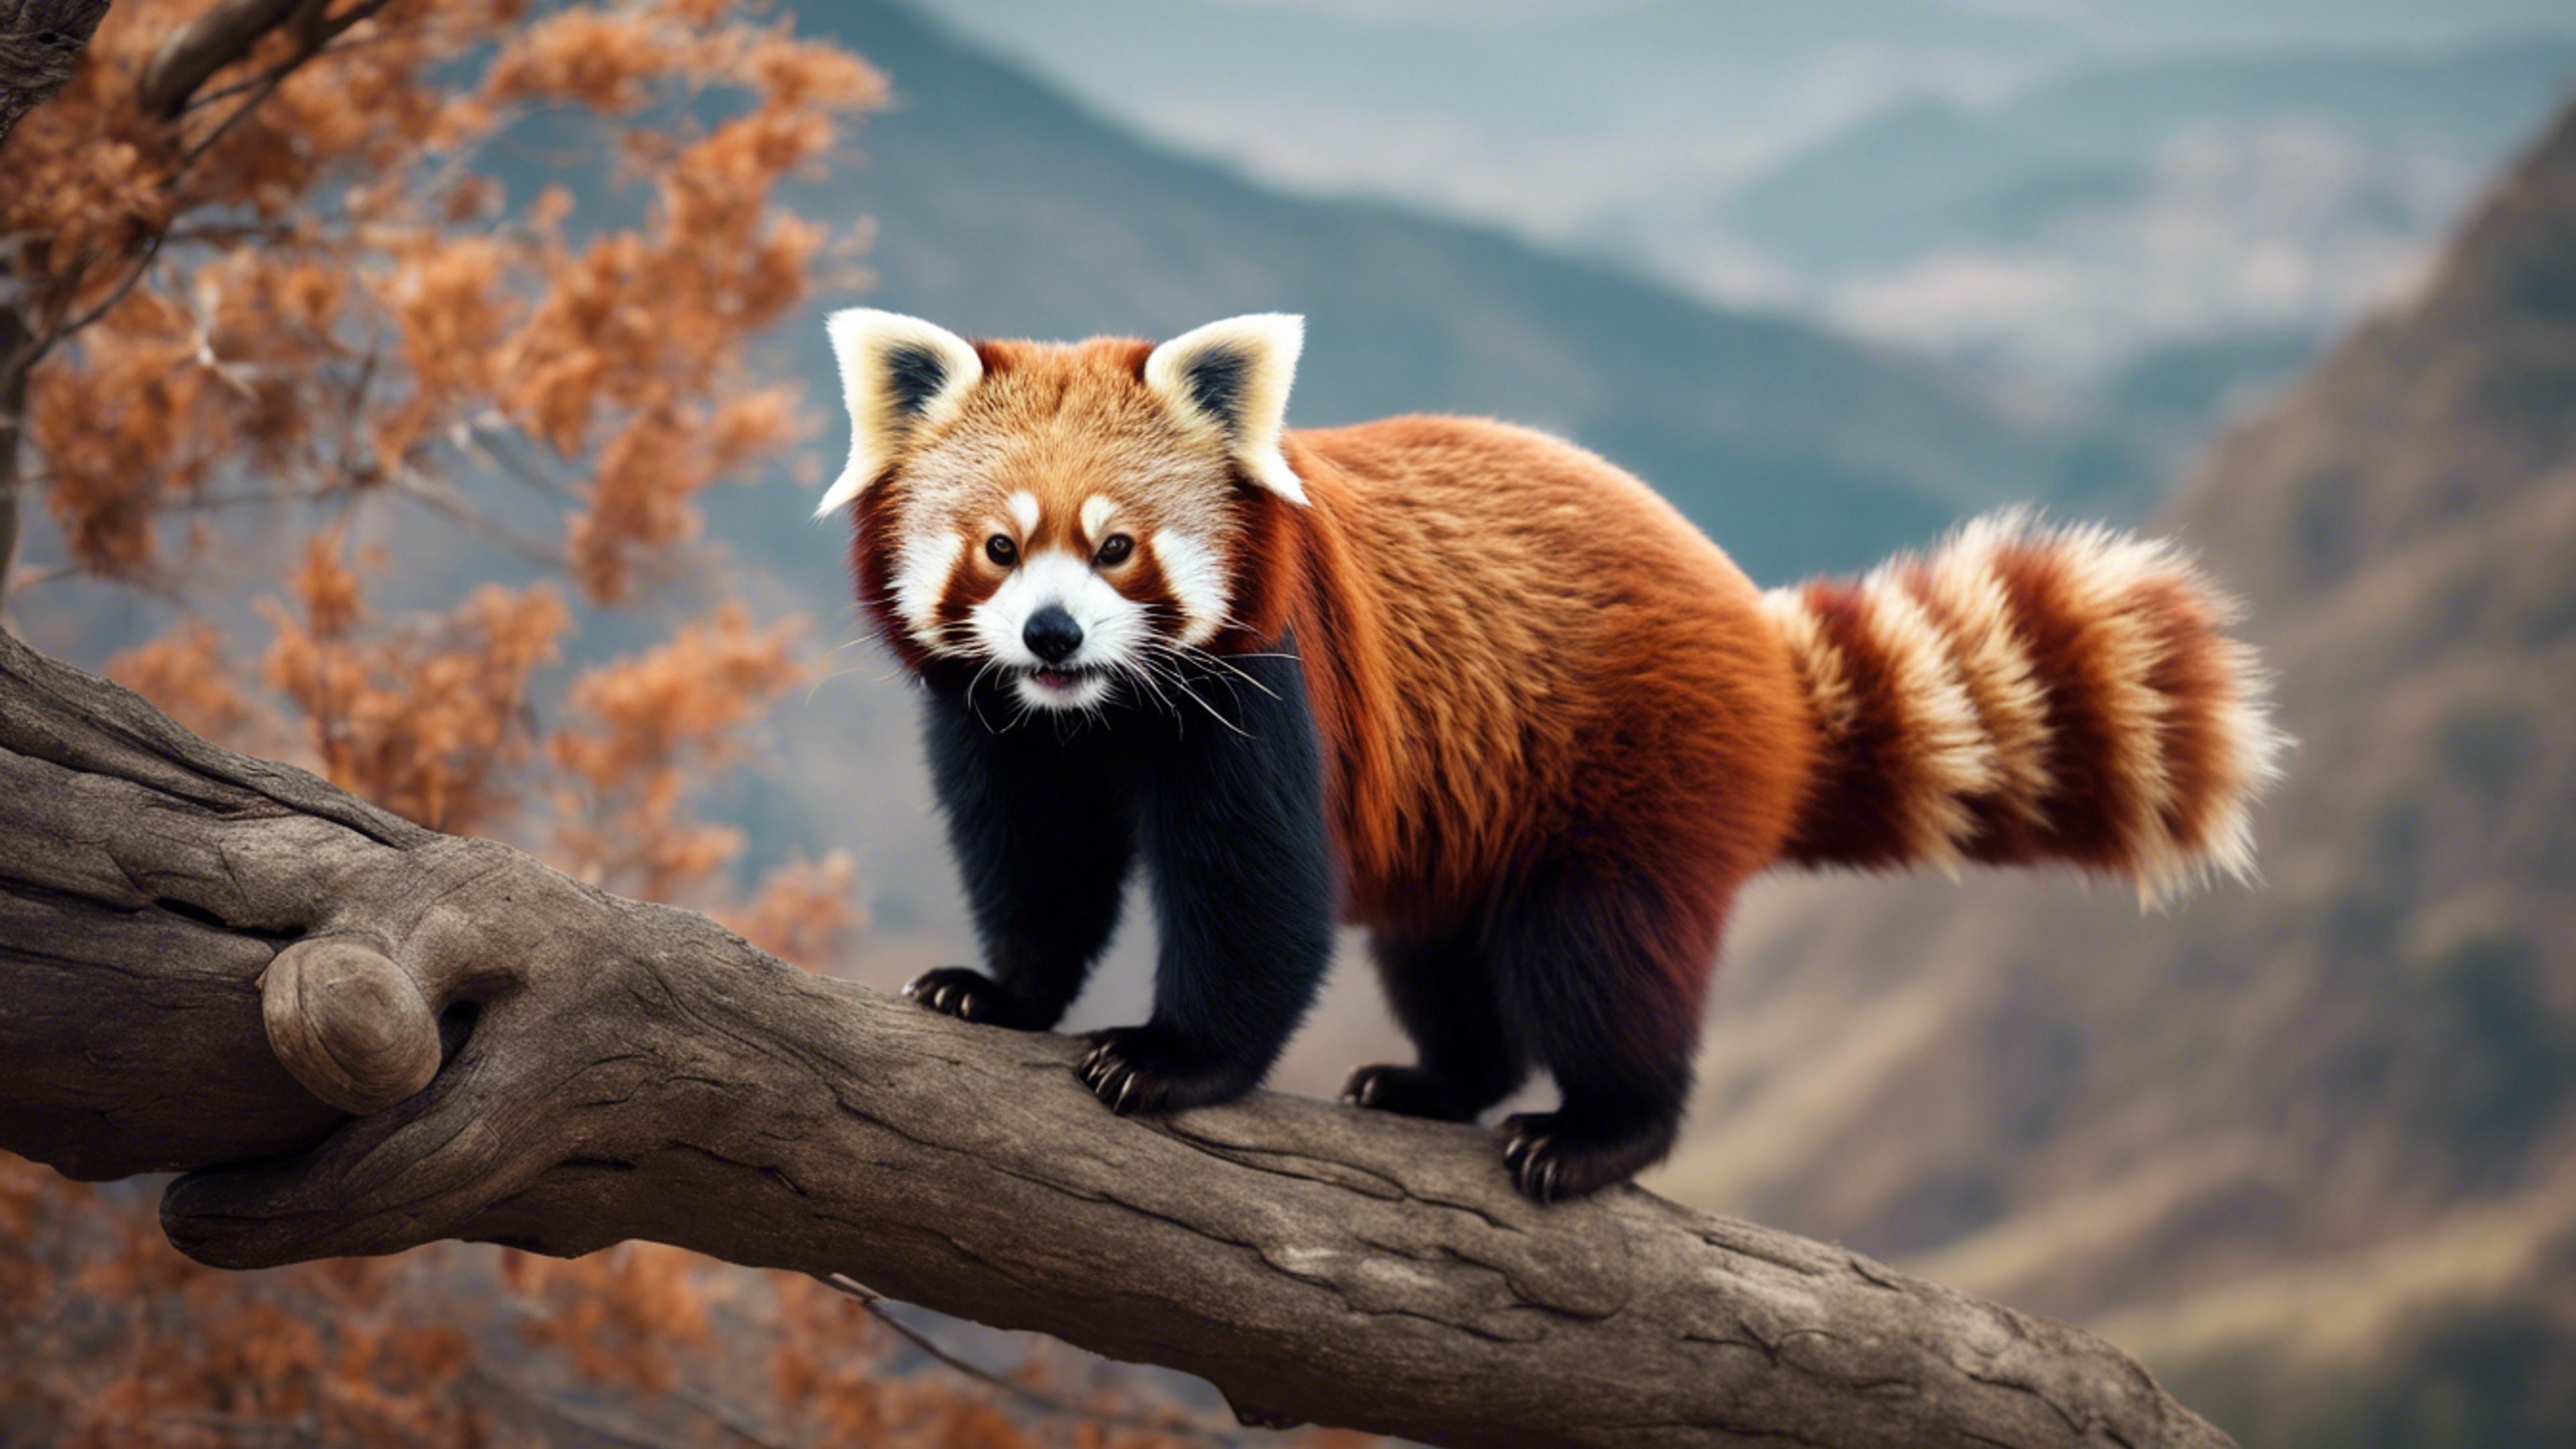 A strong, adult red panda confidently standing on a branch, mountains in the backdrop. Papel de parede[4b97538c6e5a45e29bab]